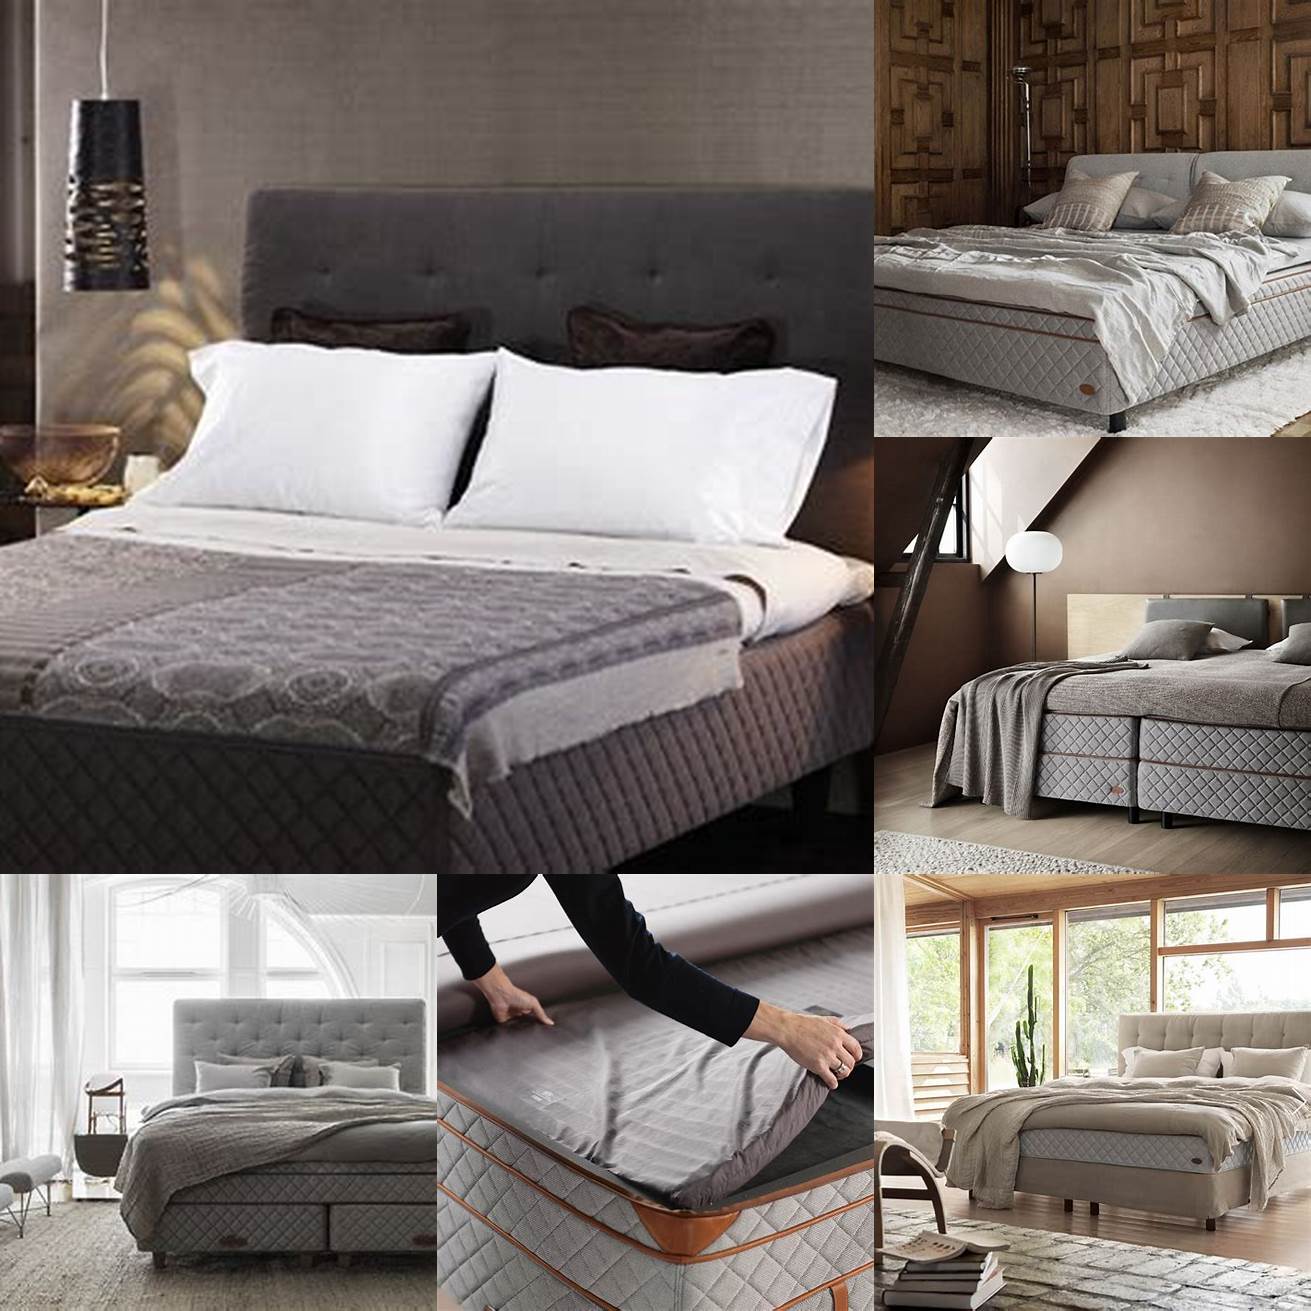 Comparison image of the Duxiana Bed and a standard mattress